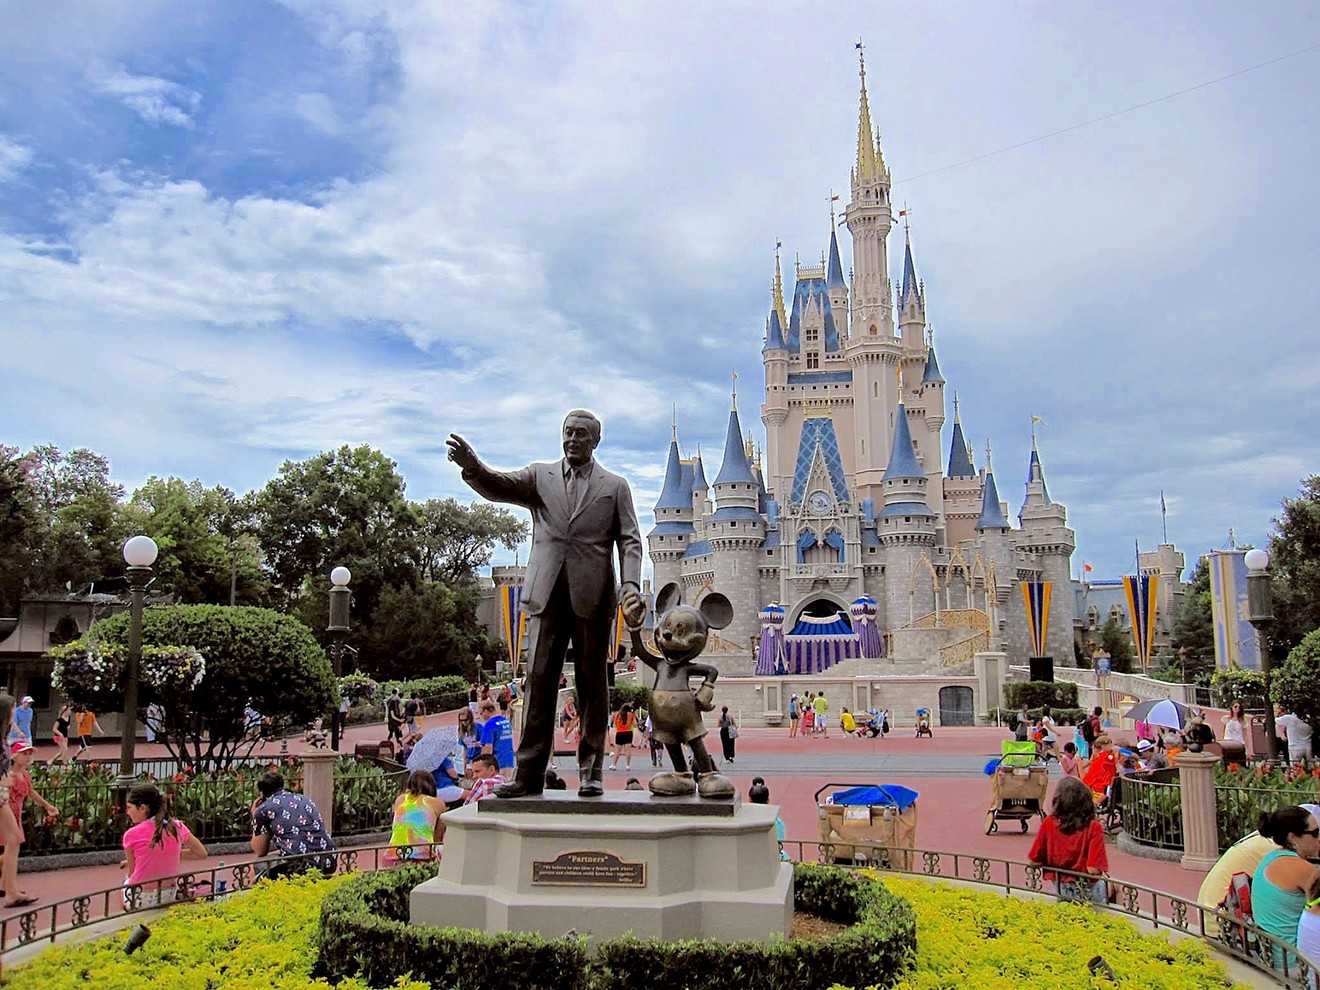 Disney hired more Summer Work Travel workers in 2015 than any other company in the United States. It used the so-called cultural exchange program to pay out less in wages and health benefits.